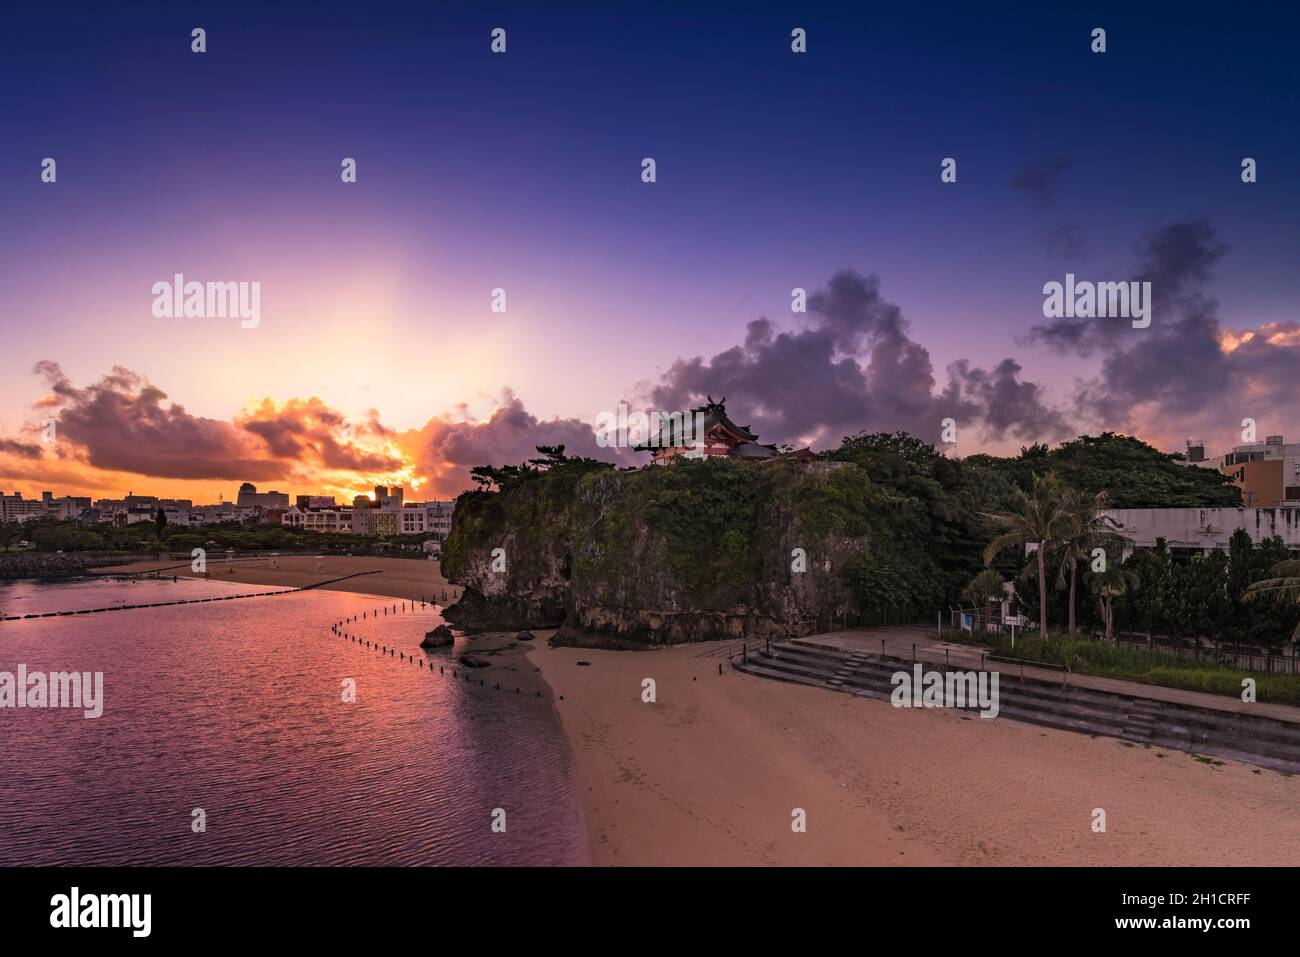 Sunrise landscape of the Shinto Shrine Naminoue at the top of a cliff overlooking the beach and ocean of Naha in Okinawa Prefecture, Japan. Stock Photo